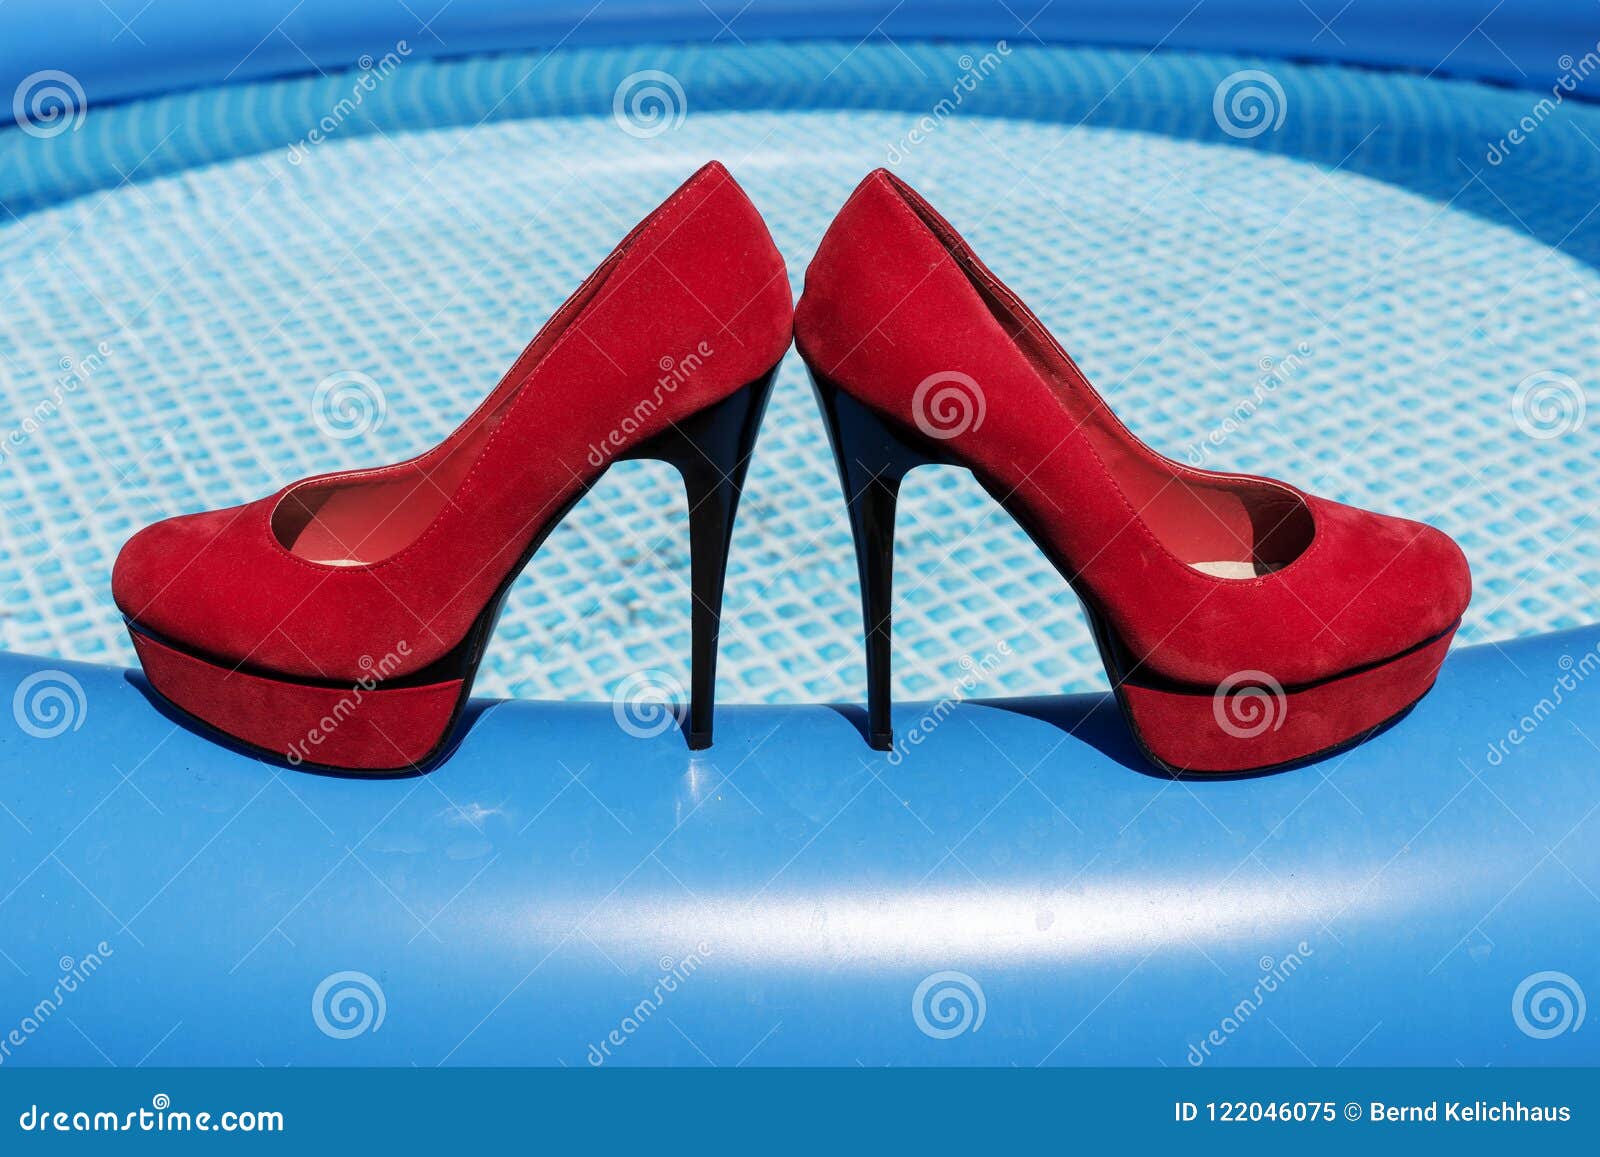 Red High Heels on the Edge of the Swimming Pool Stock Image - Image of ...